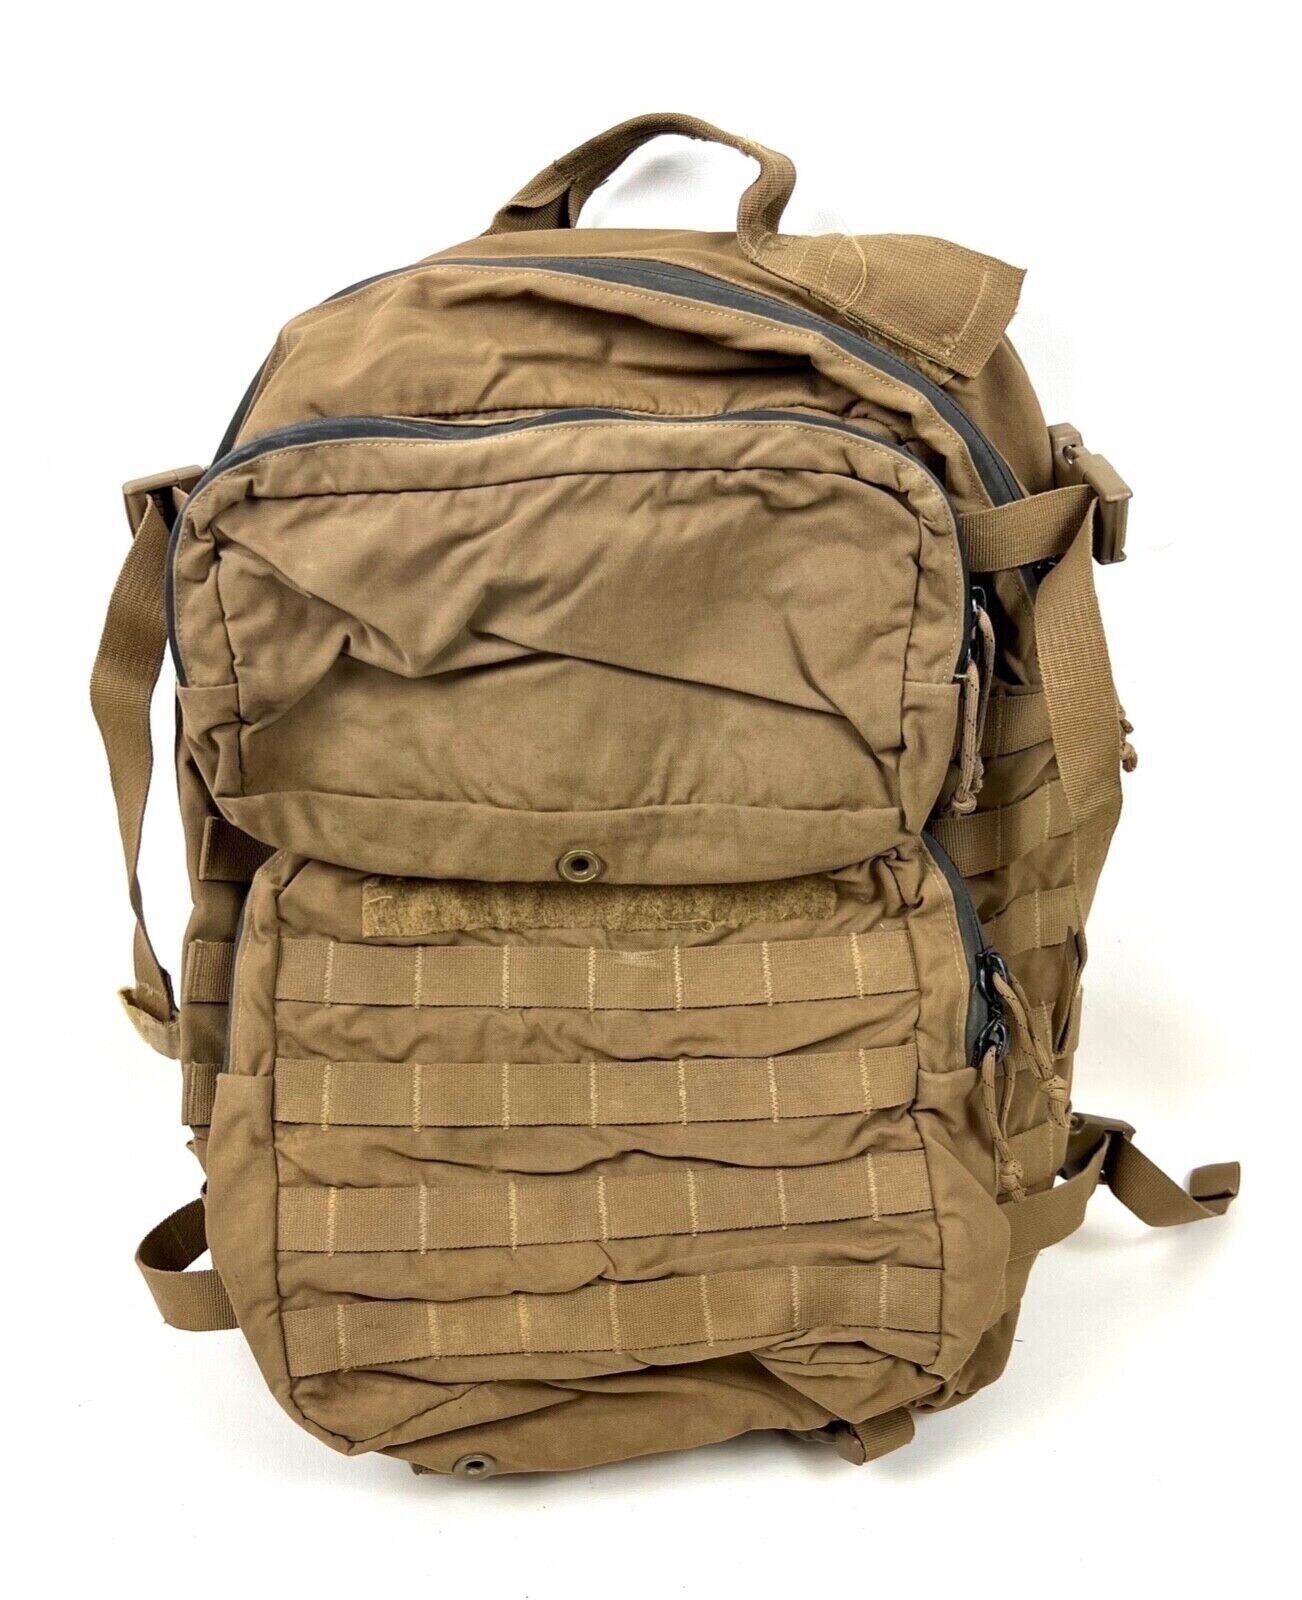 USMC Eagle Ind. FILBE 3 Day Assault Pack Coyote Tan Backpack w/ Assault Pouch